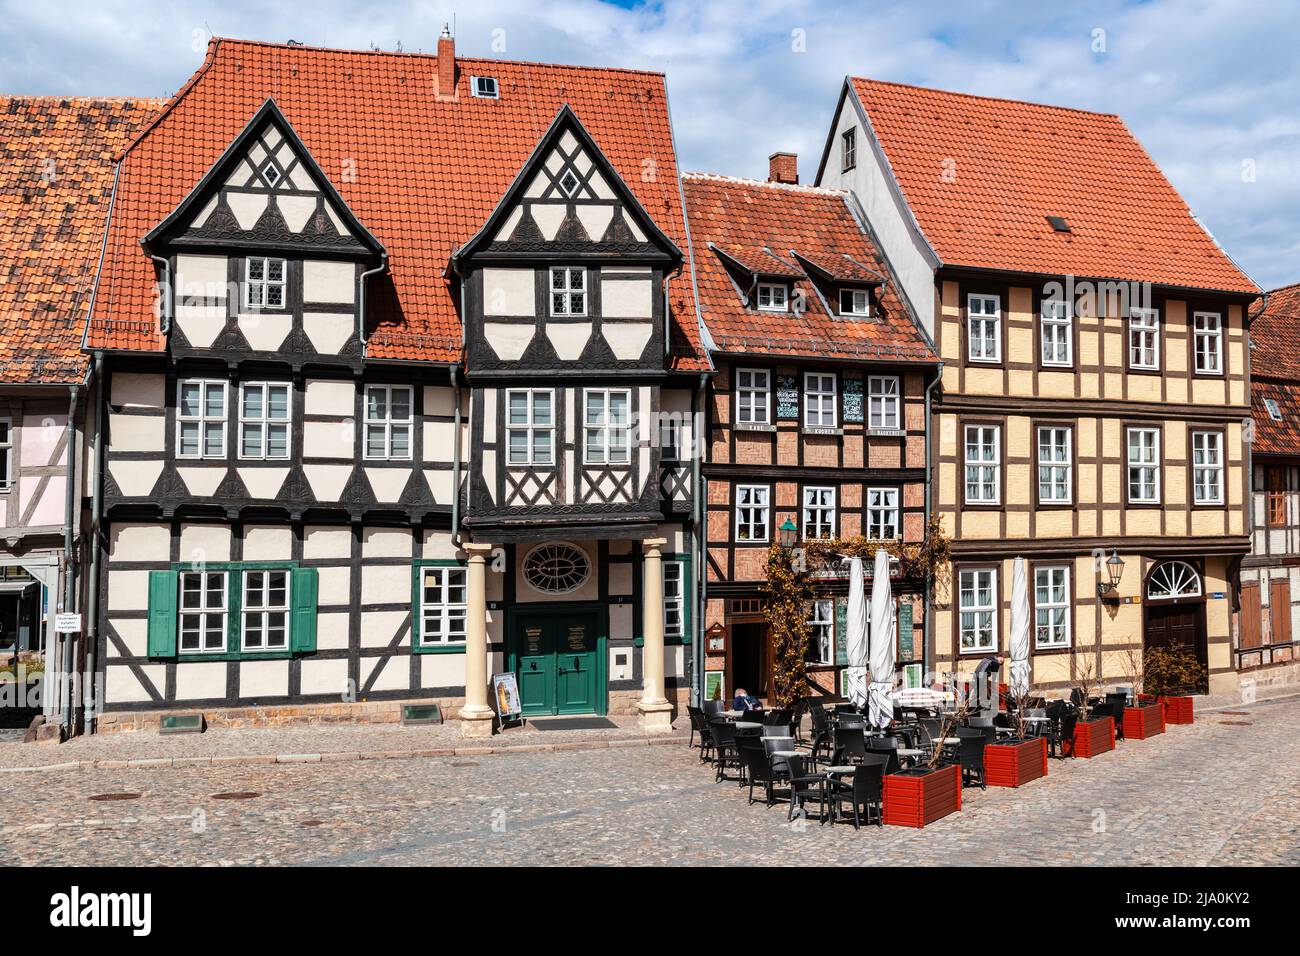 Historic timber frame houses in the medieval town Quedlinburg, North of the Harz mountains. Saxony-Anhalt, Germany - April 26, 2018 Stock Photo